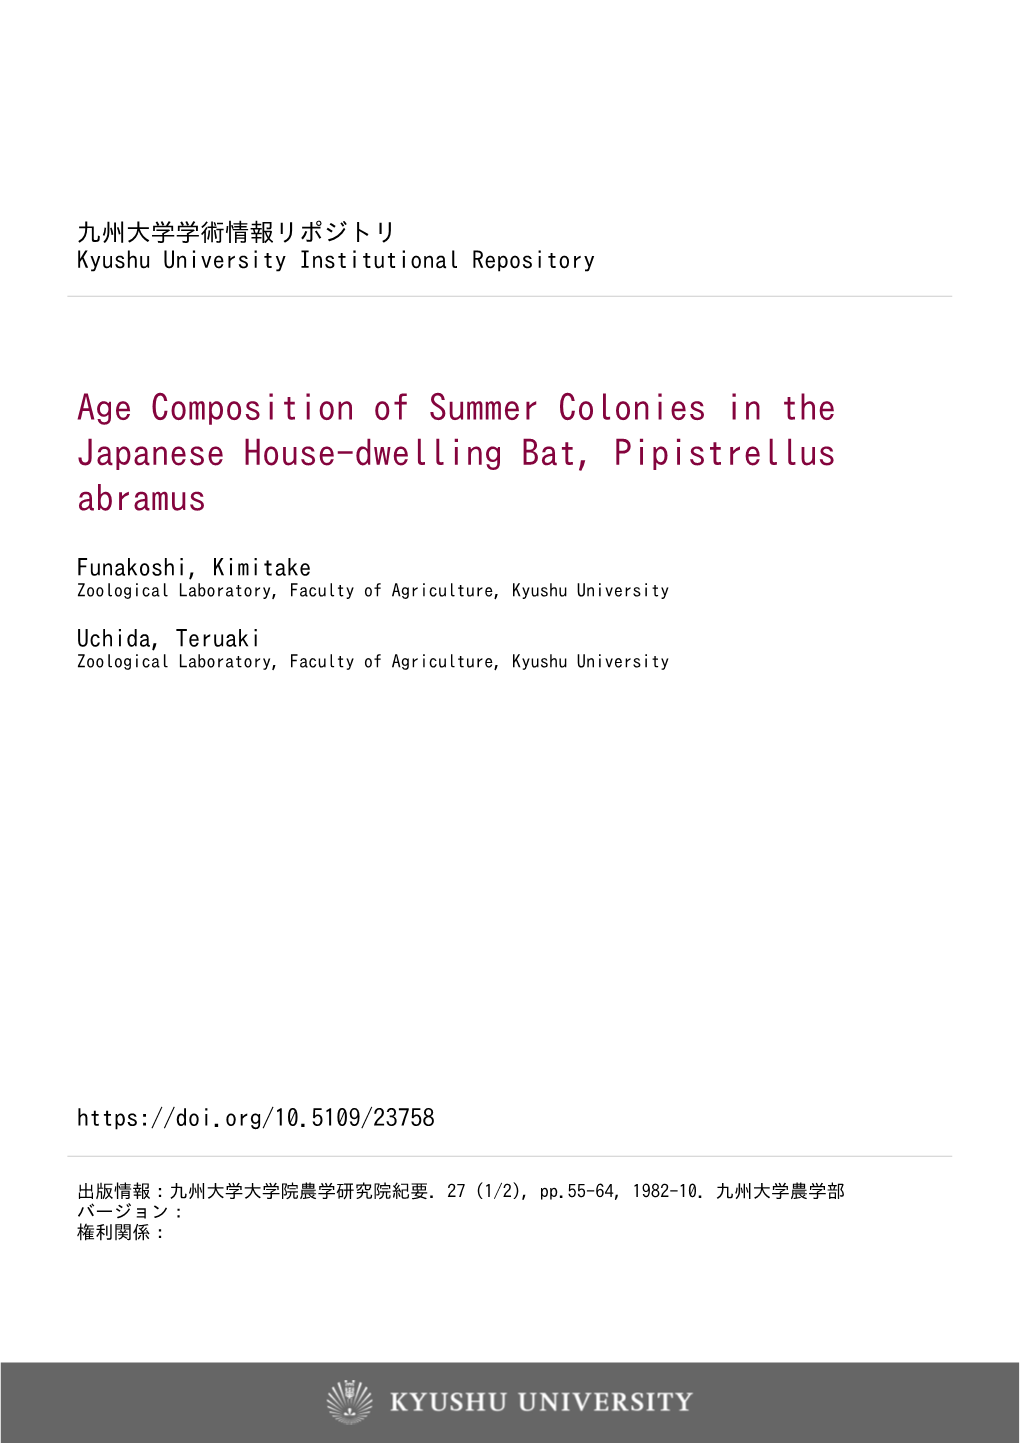 Age Composition of Summer Colonies in the Japanese House-Dwelling Bat, Pipistrellus Abramus